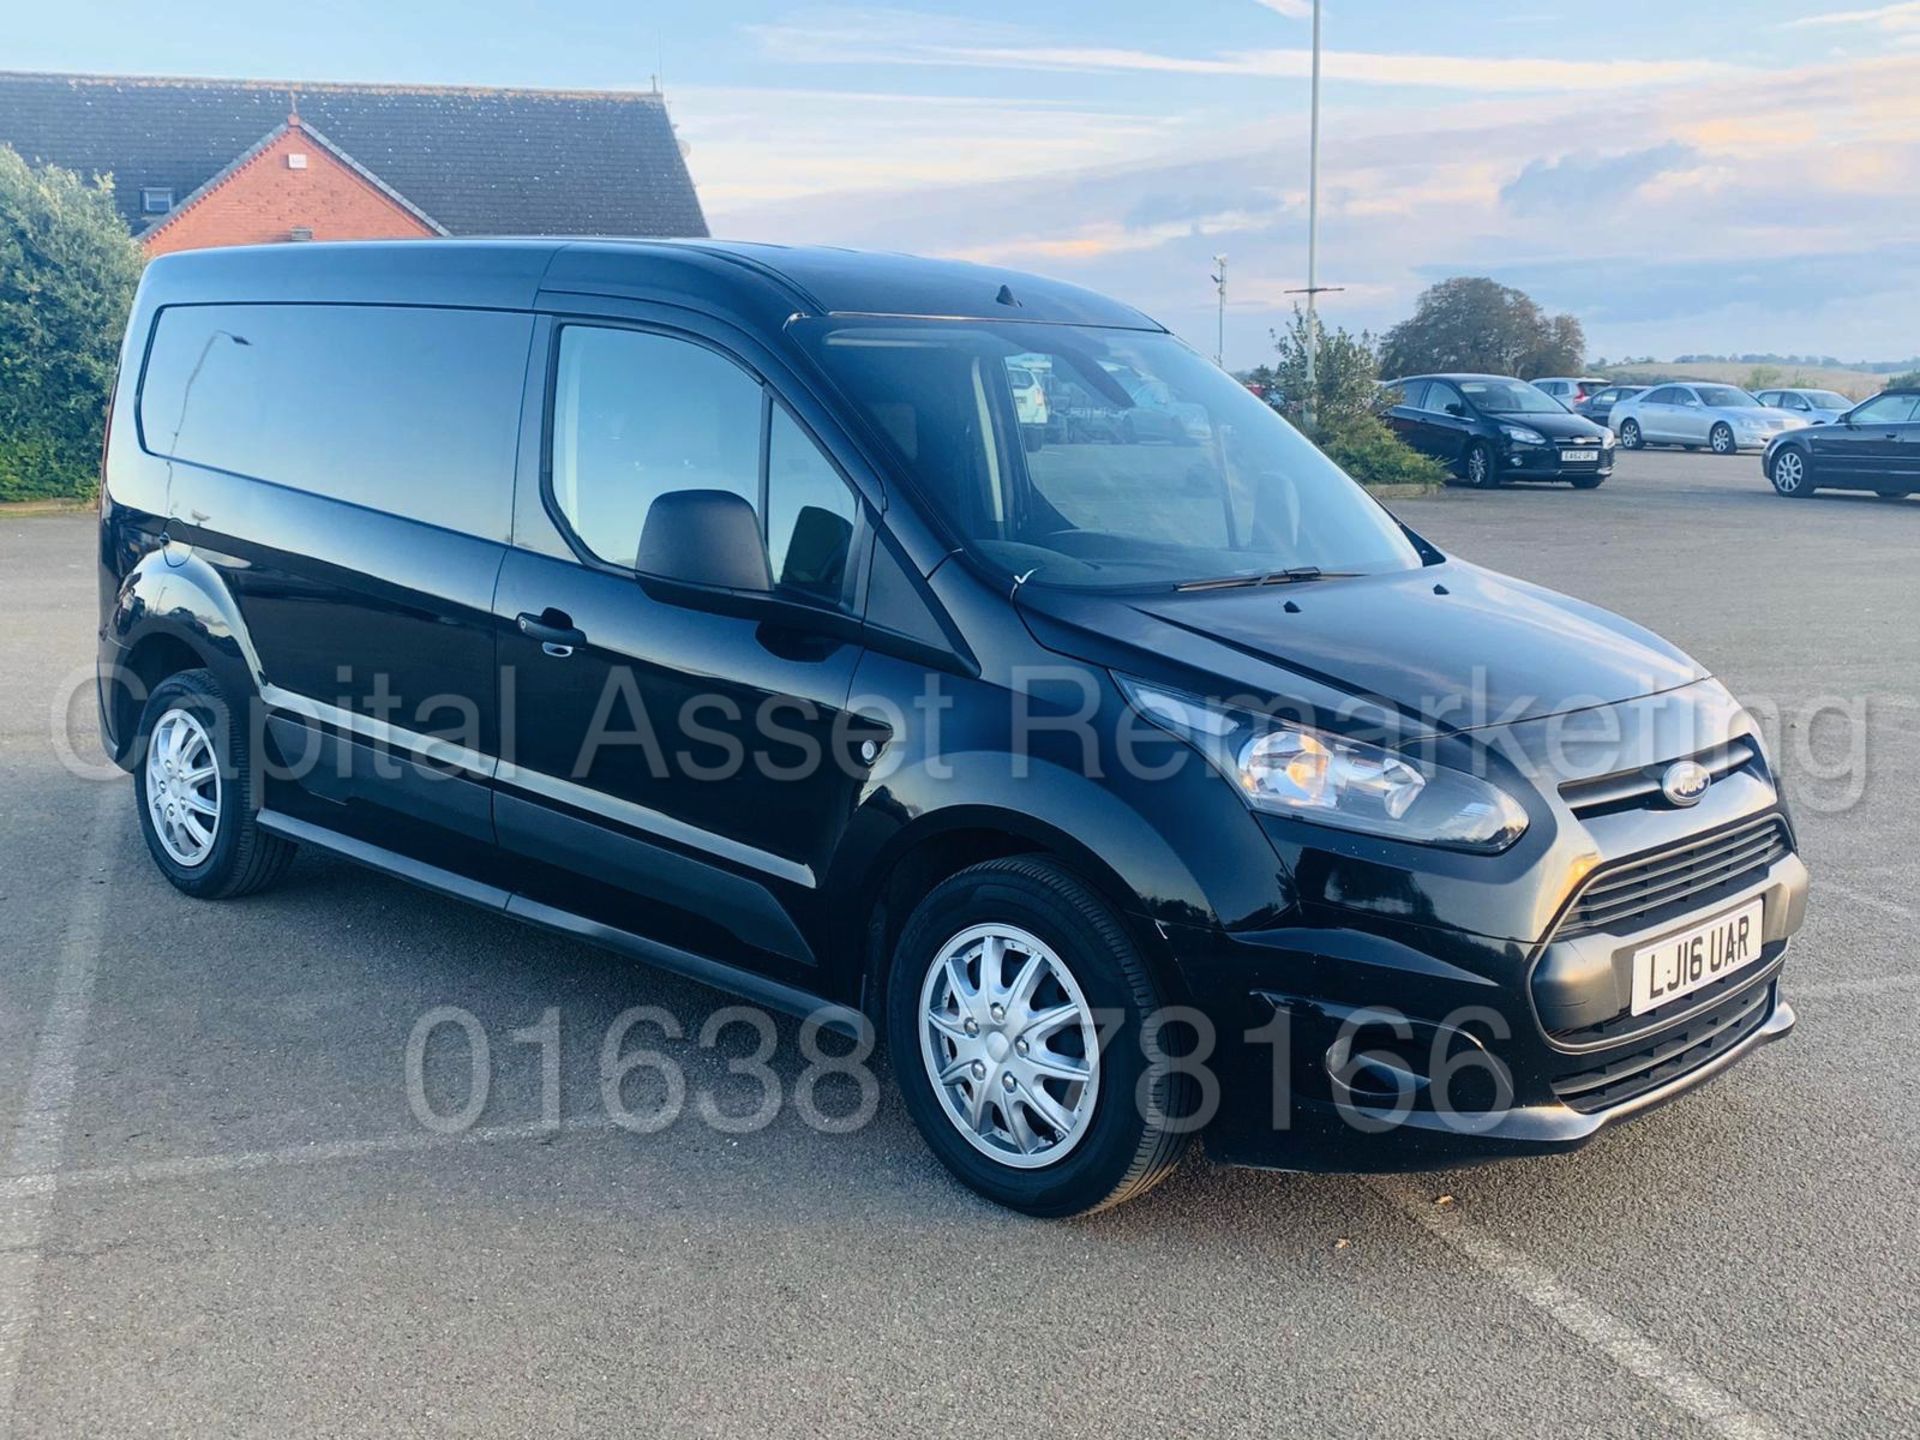 (ON SALE) FORD TRANSIT CONNECT *TREND EDITION* LWB (2016) '1.6 TDCI -95 BHP' **AIR CON** (3 SEATER)